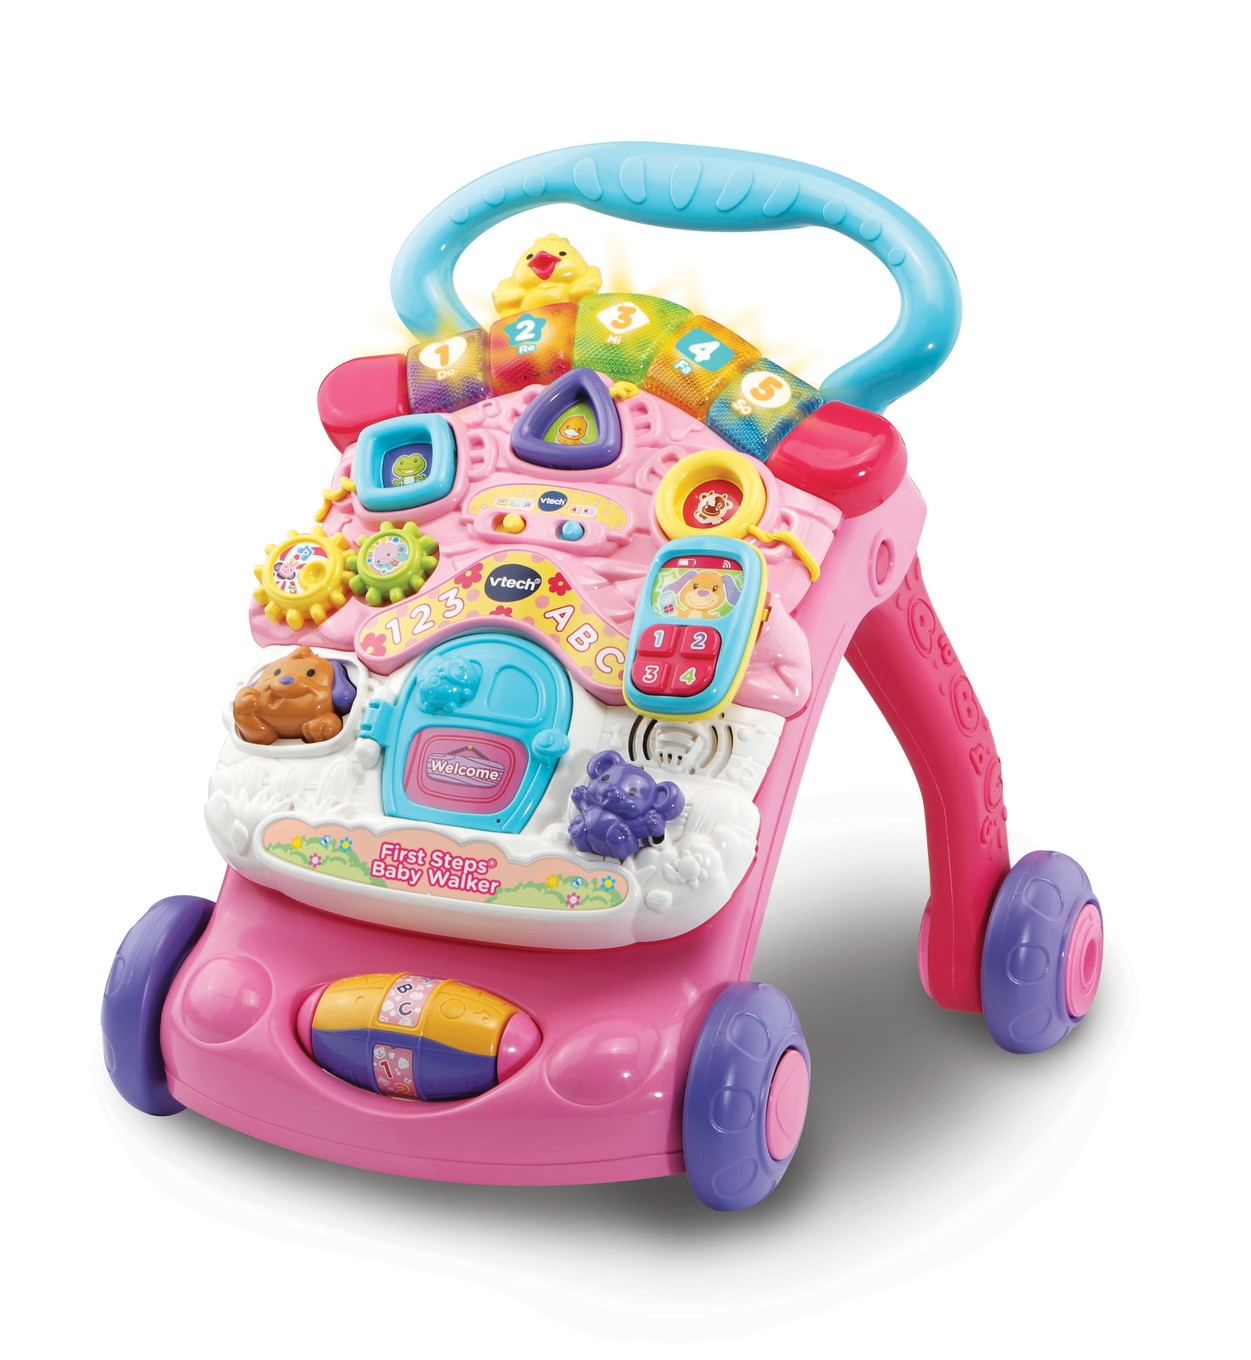 Baby Walker for Kids, The Step Mate for Your Child's First Steps